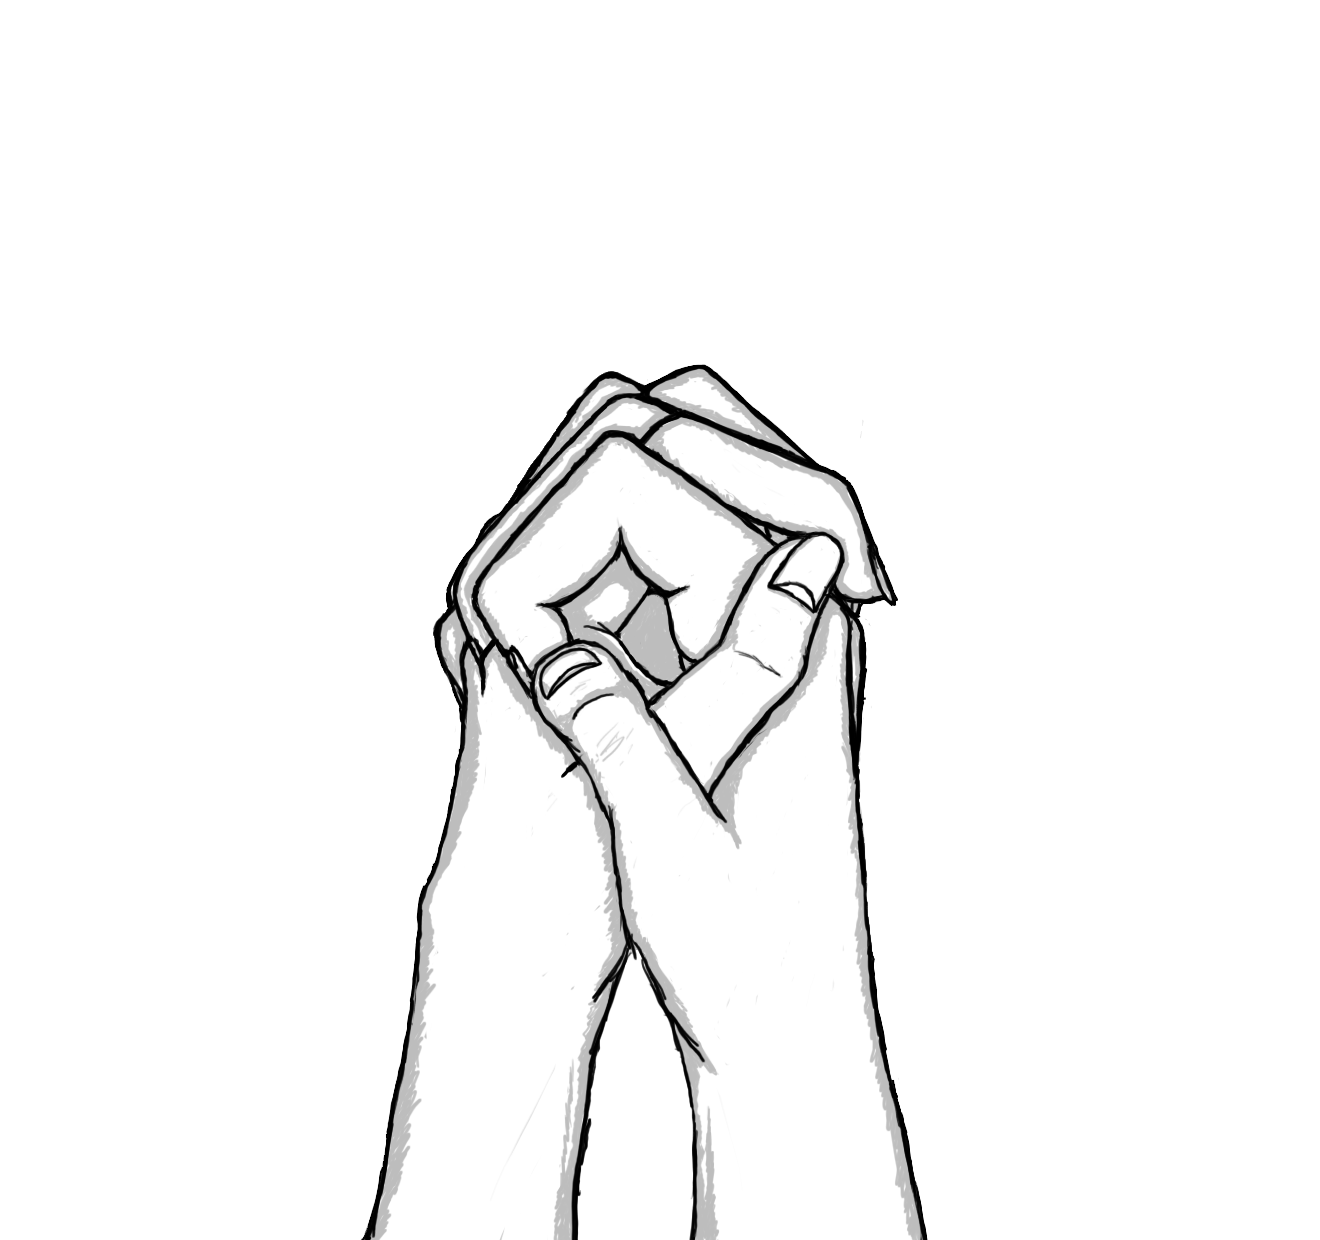 Line Drawing Of Hands - ClipArt Best